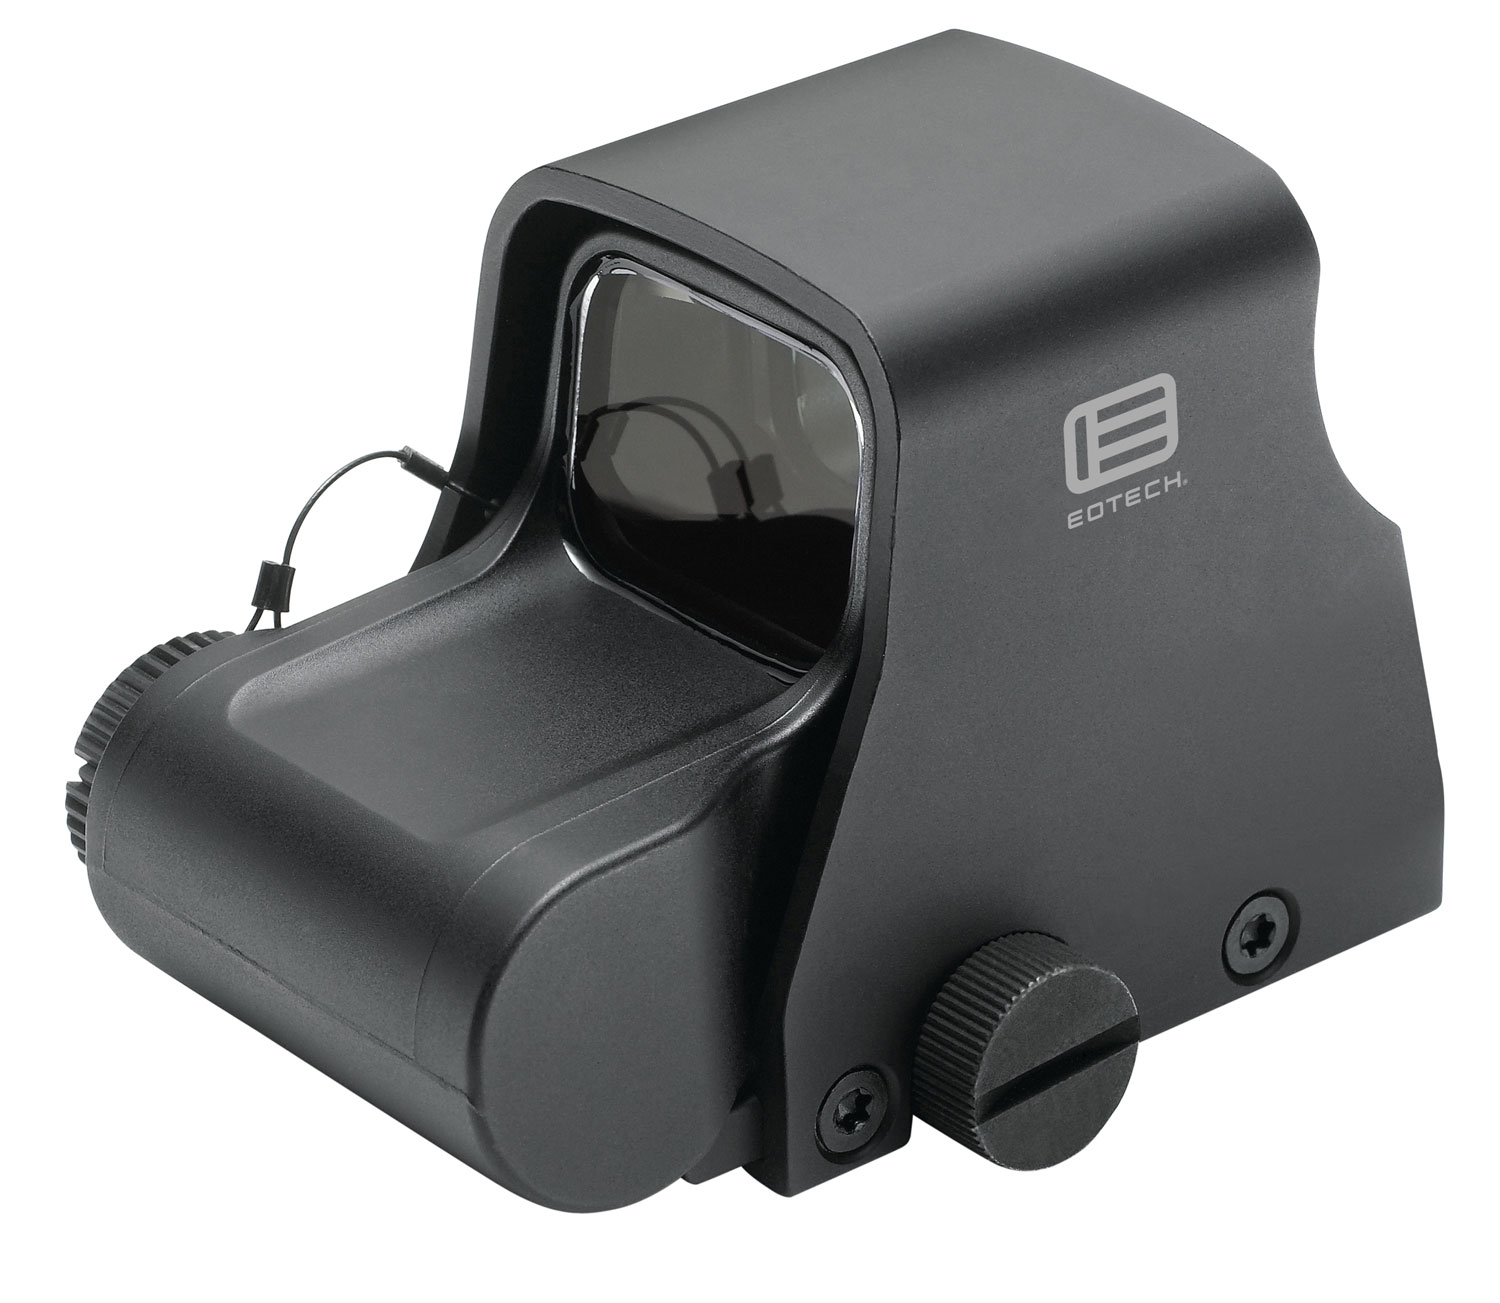 Eotech XPS20 XPS2 Holographic Weapon Sight Matte Black 1x 1 MOA/68 MOA Red Ring/Dot Reticle